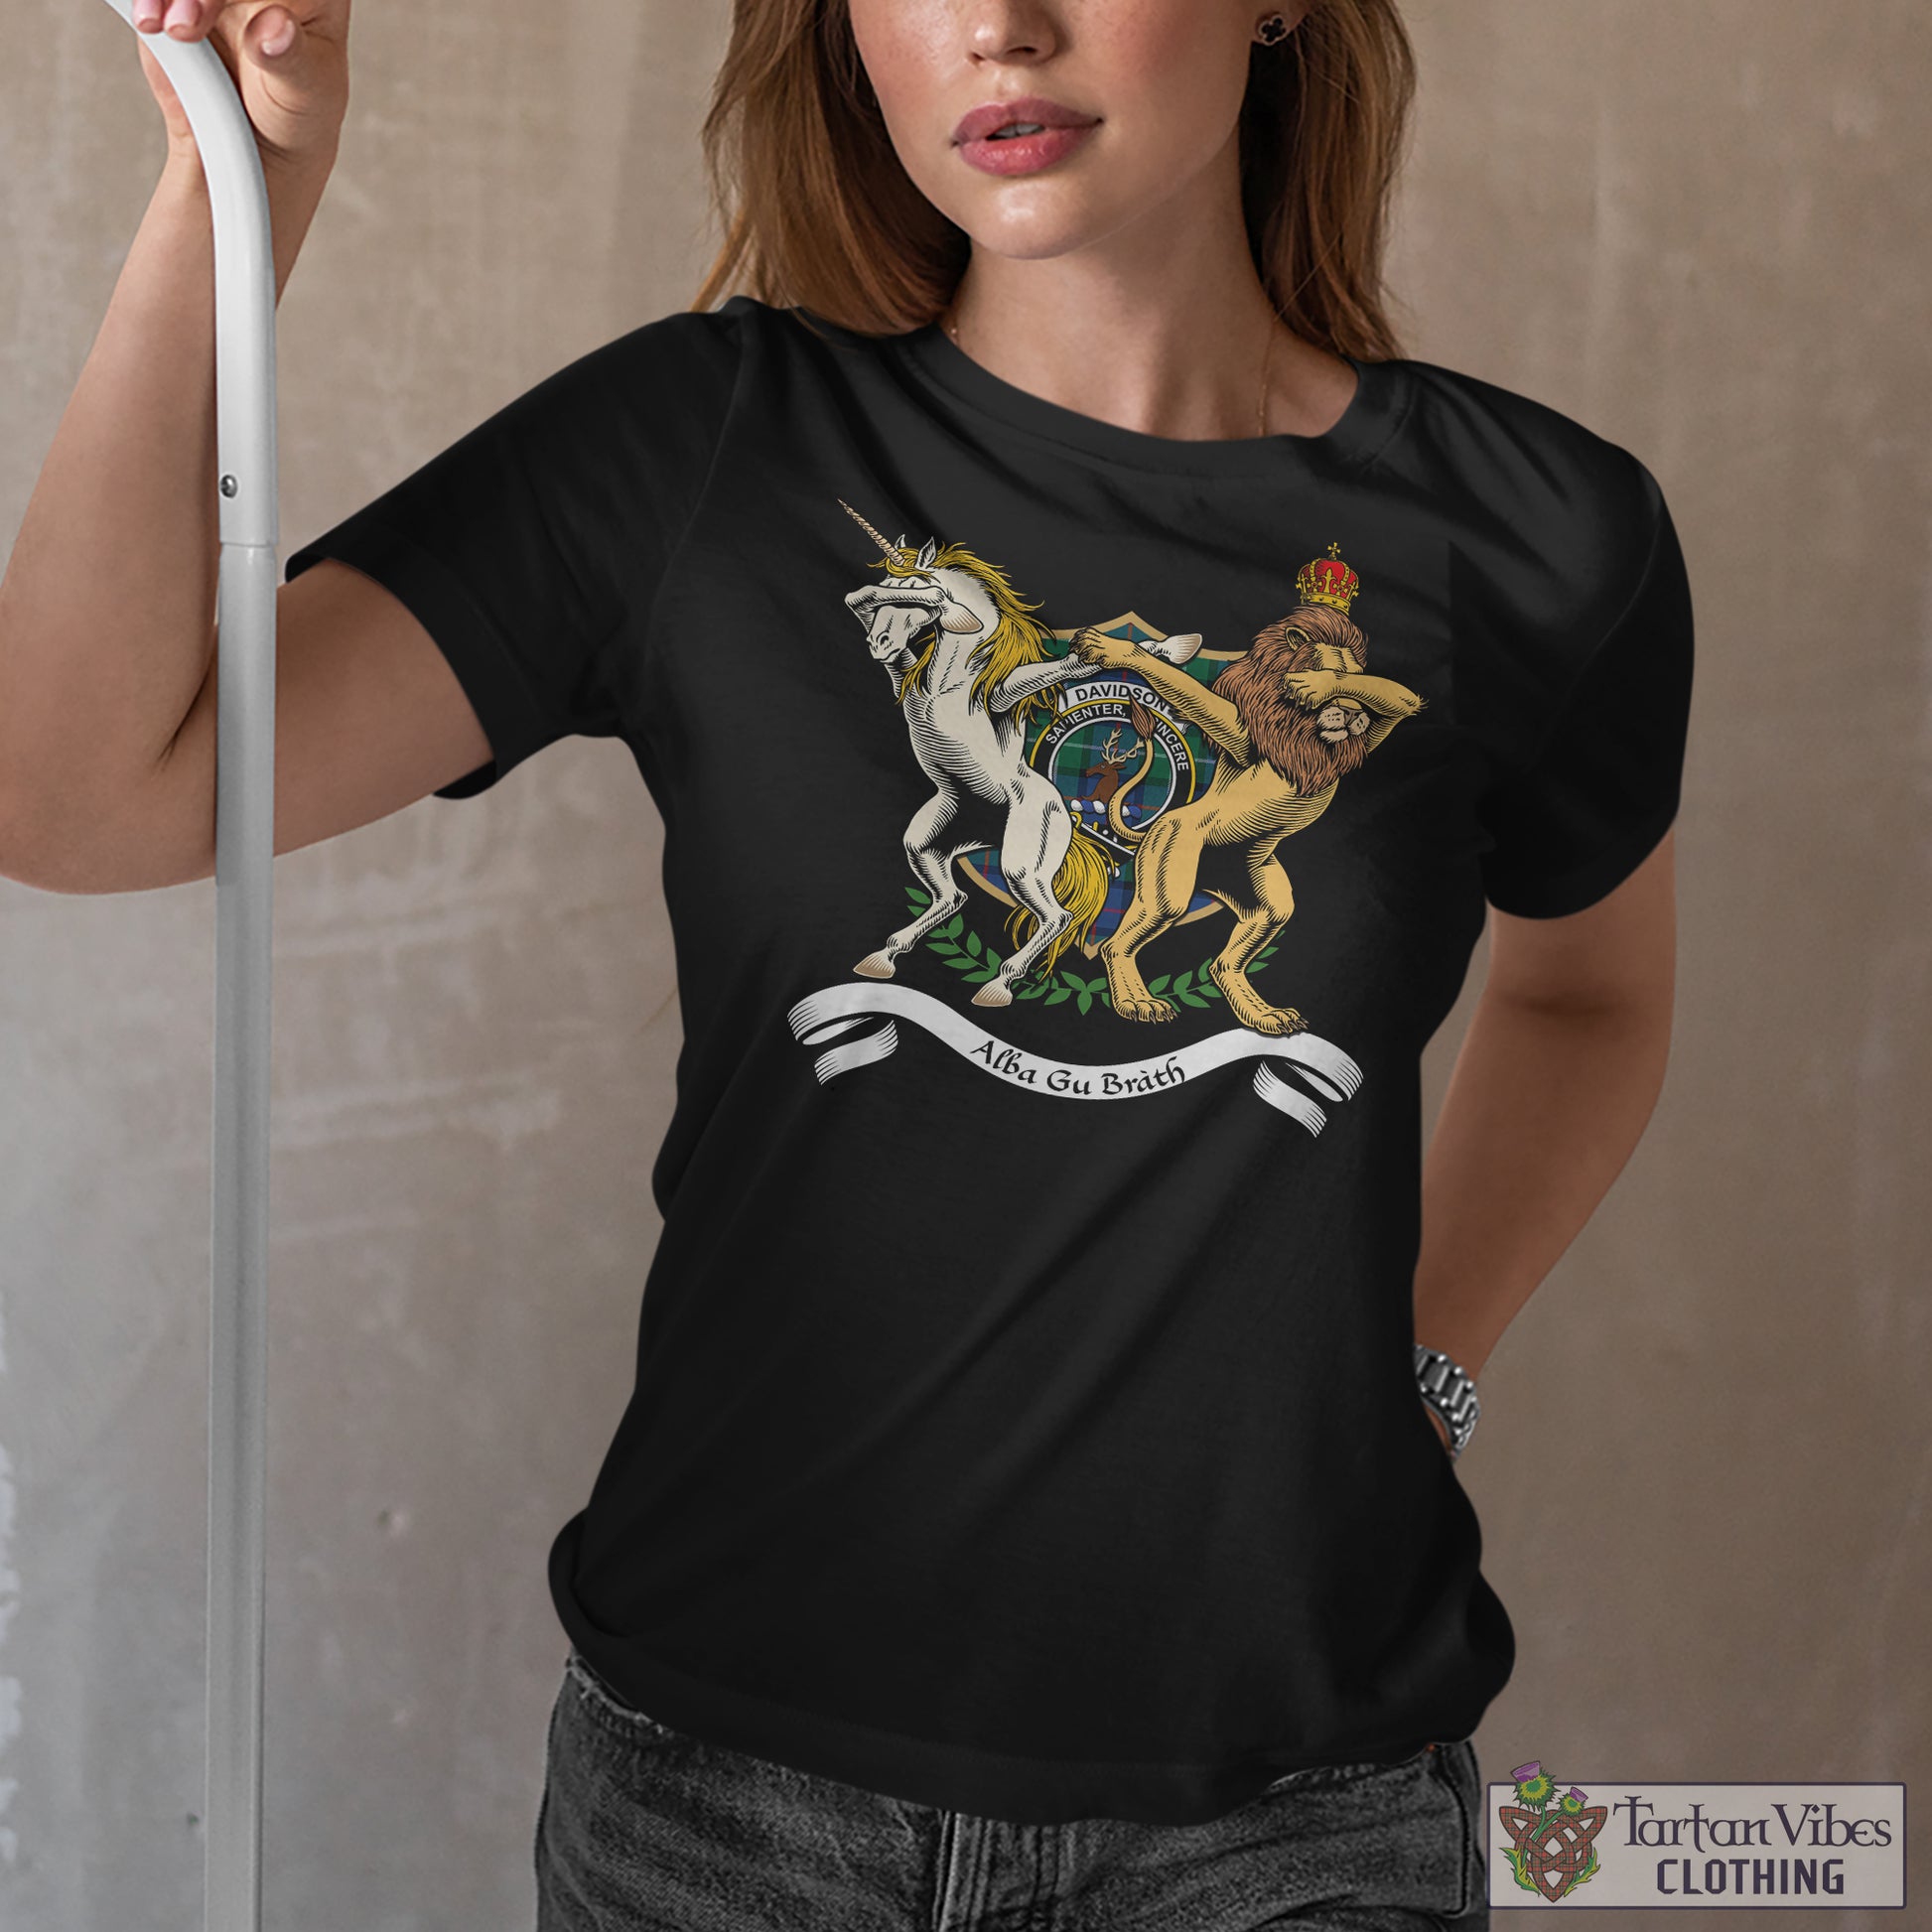 Tartan Vibes Clothing Davidson of Tulloch Family Crest Cotton Women's T-Shirt with Scotland Royal Coat Of Arm Funny Style